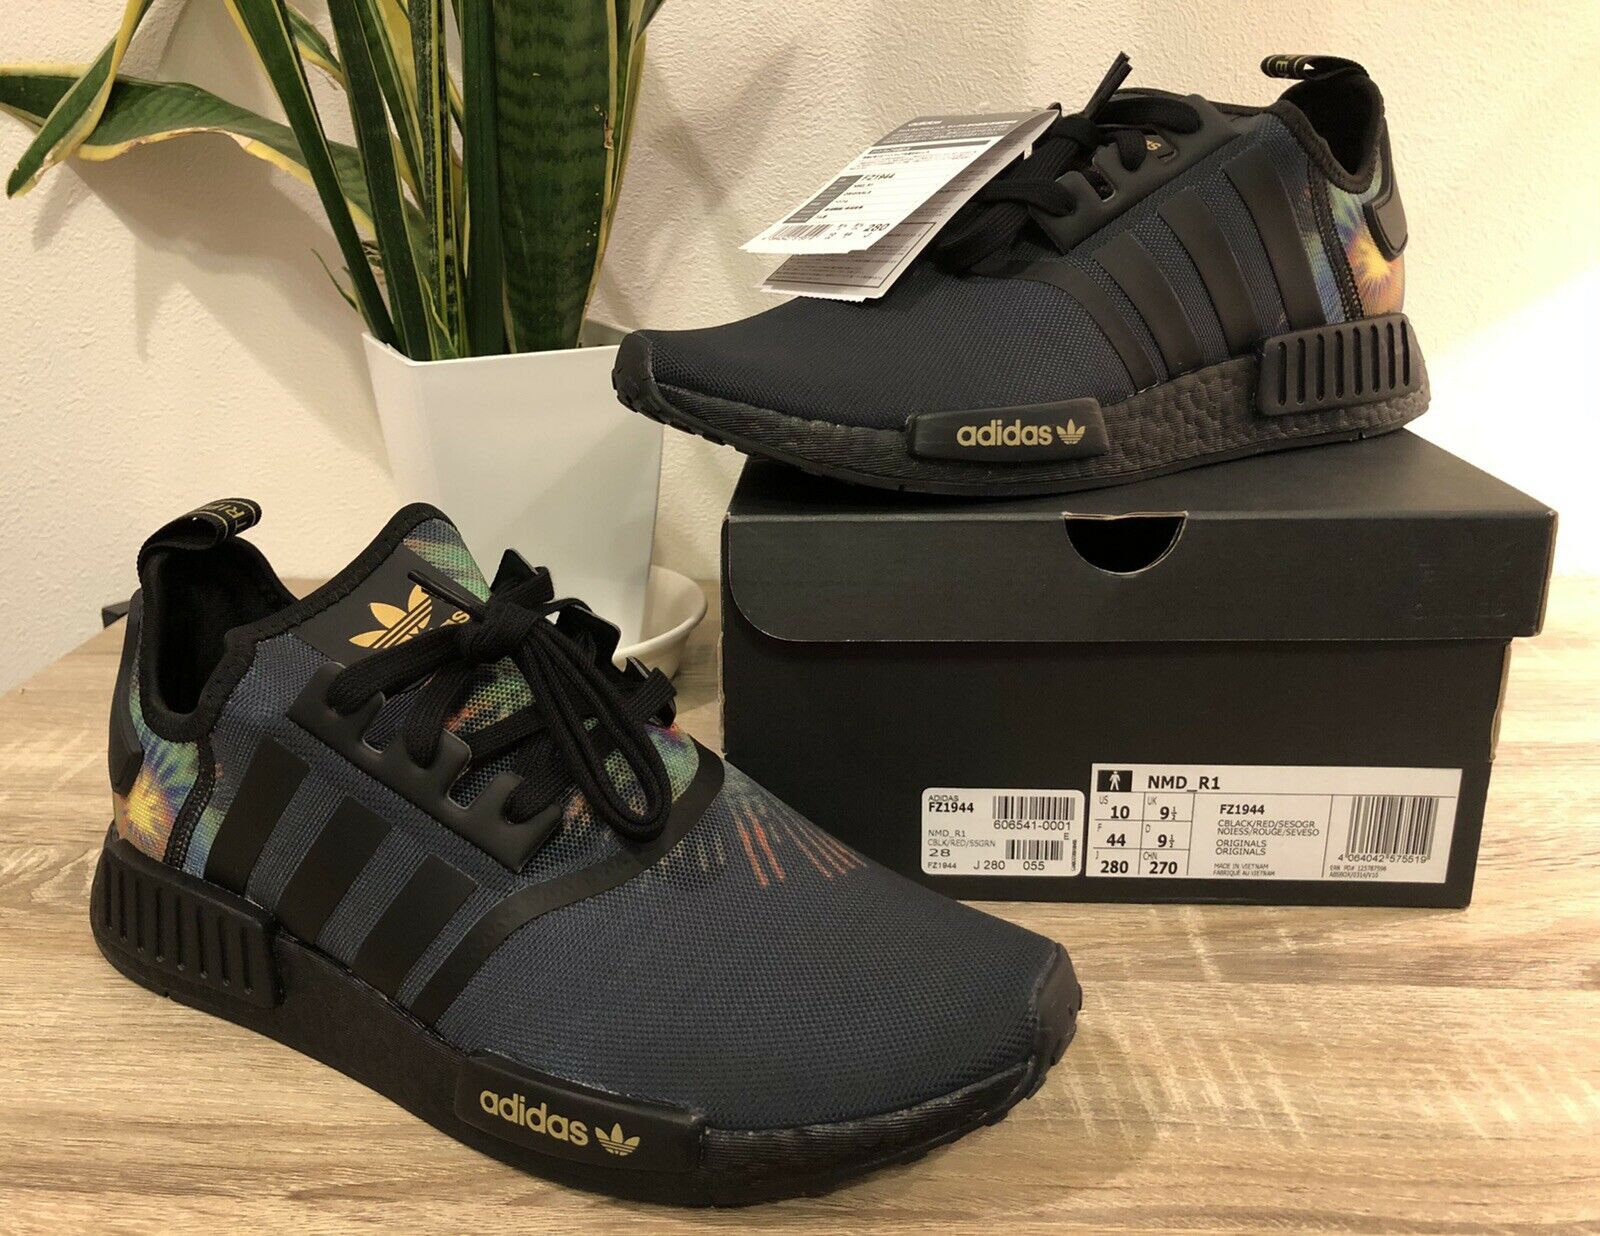 Deadstock adidas NMD R1 JAPAN EXCLUSIVE “Fireworks” Running Shoes FZ1944